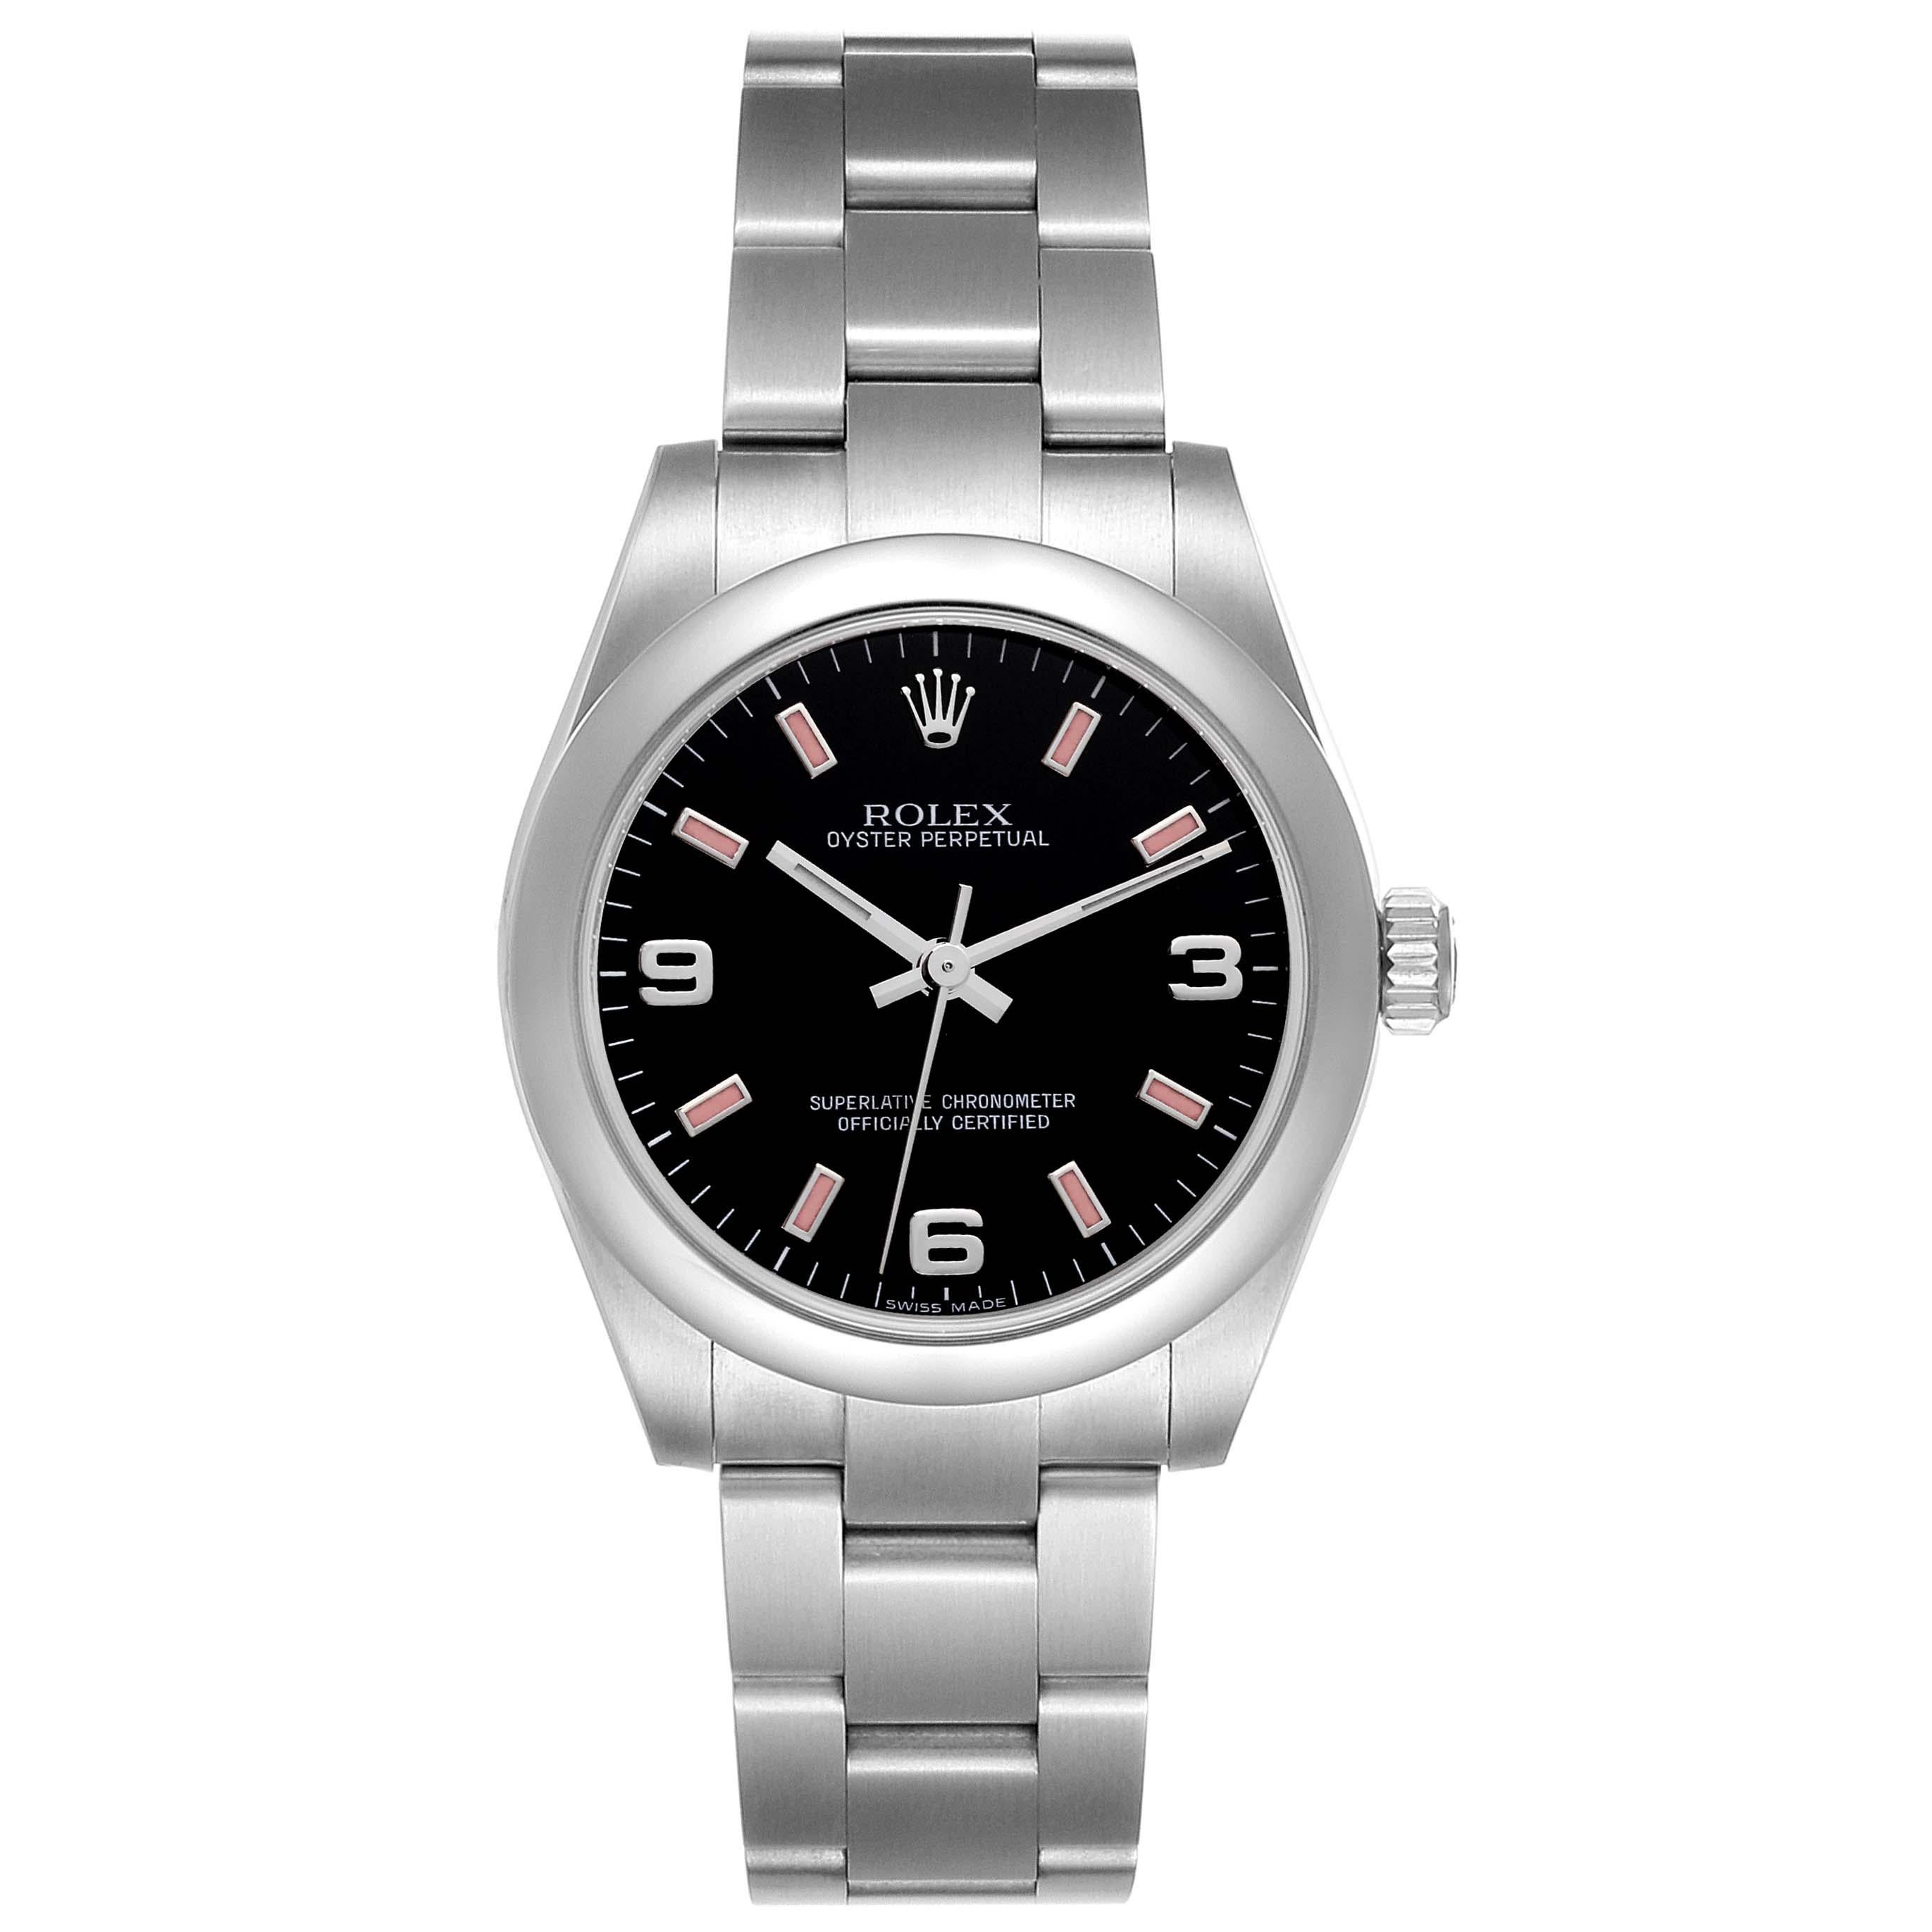 Rolex Non-Date Midsize Black Dial Pink Hour Markers Steel Ladies Watch 177200. Officially certified chronometer self-winding movement with quickset date function. Stainless steel oyster case 31.0 mm in diameter. Rolex logo on a crown. Stainless